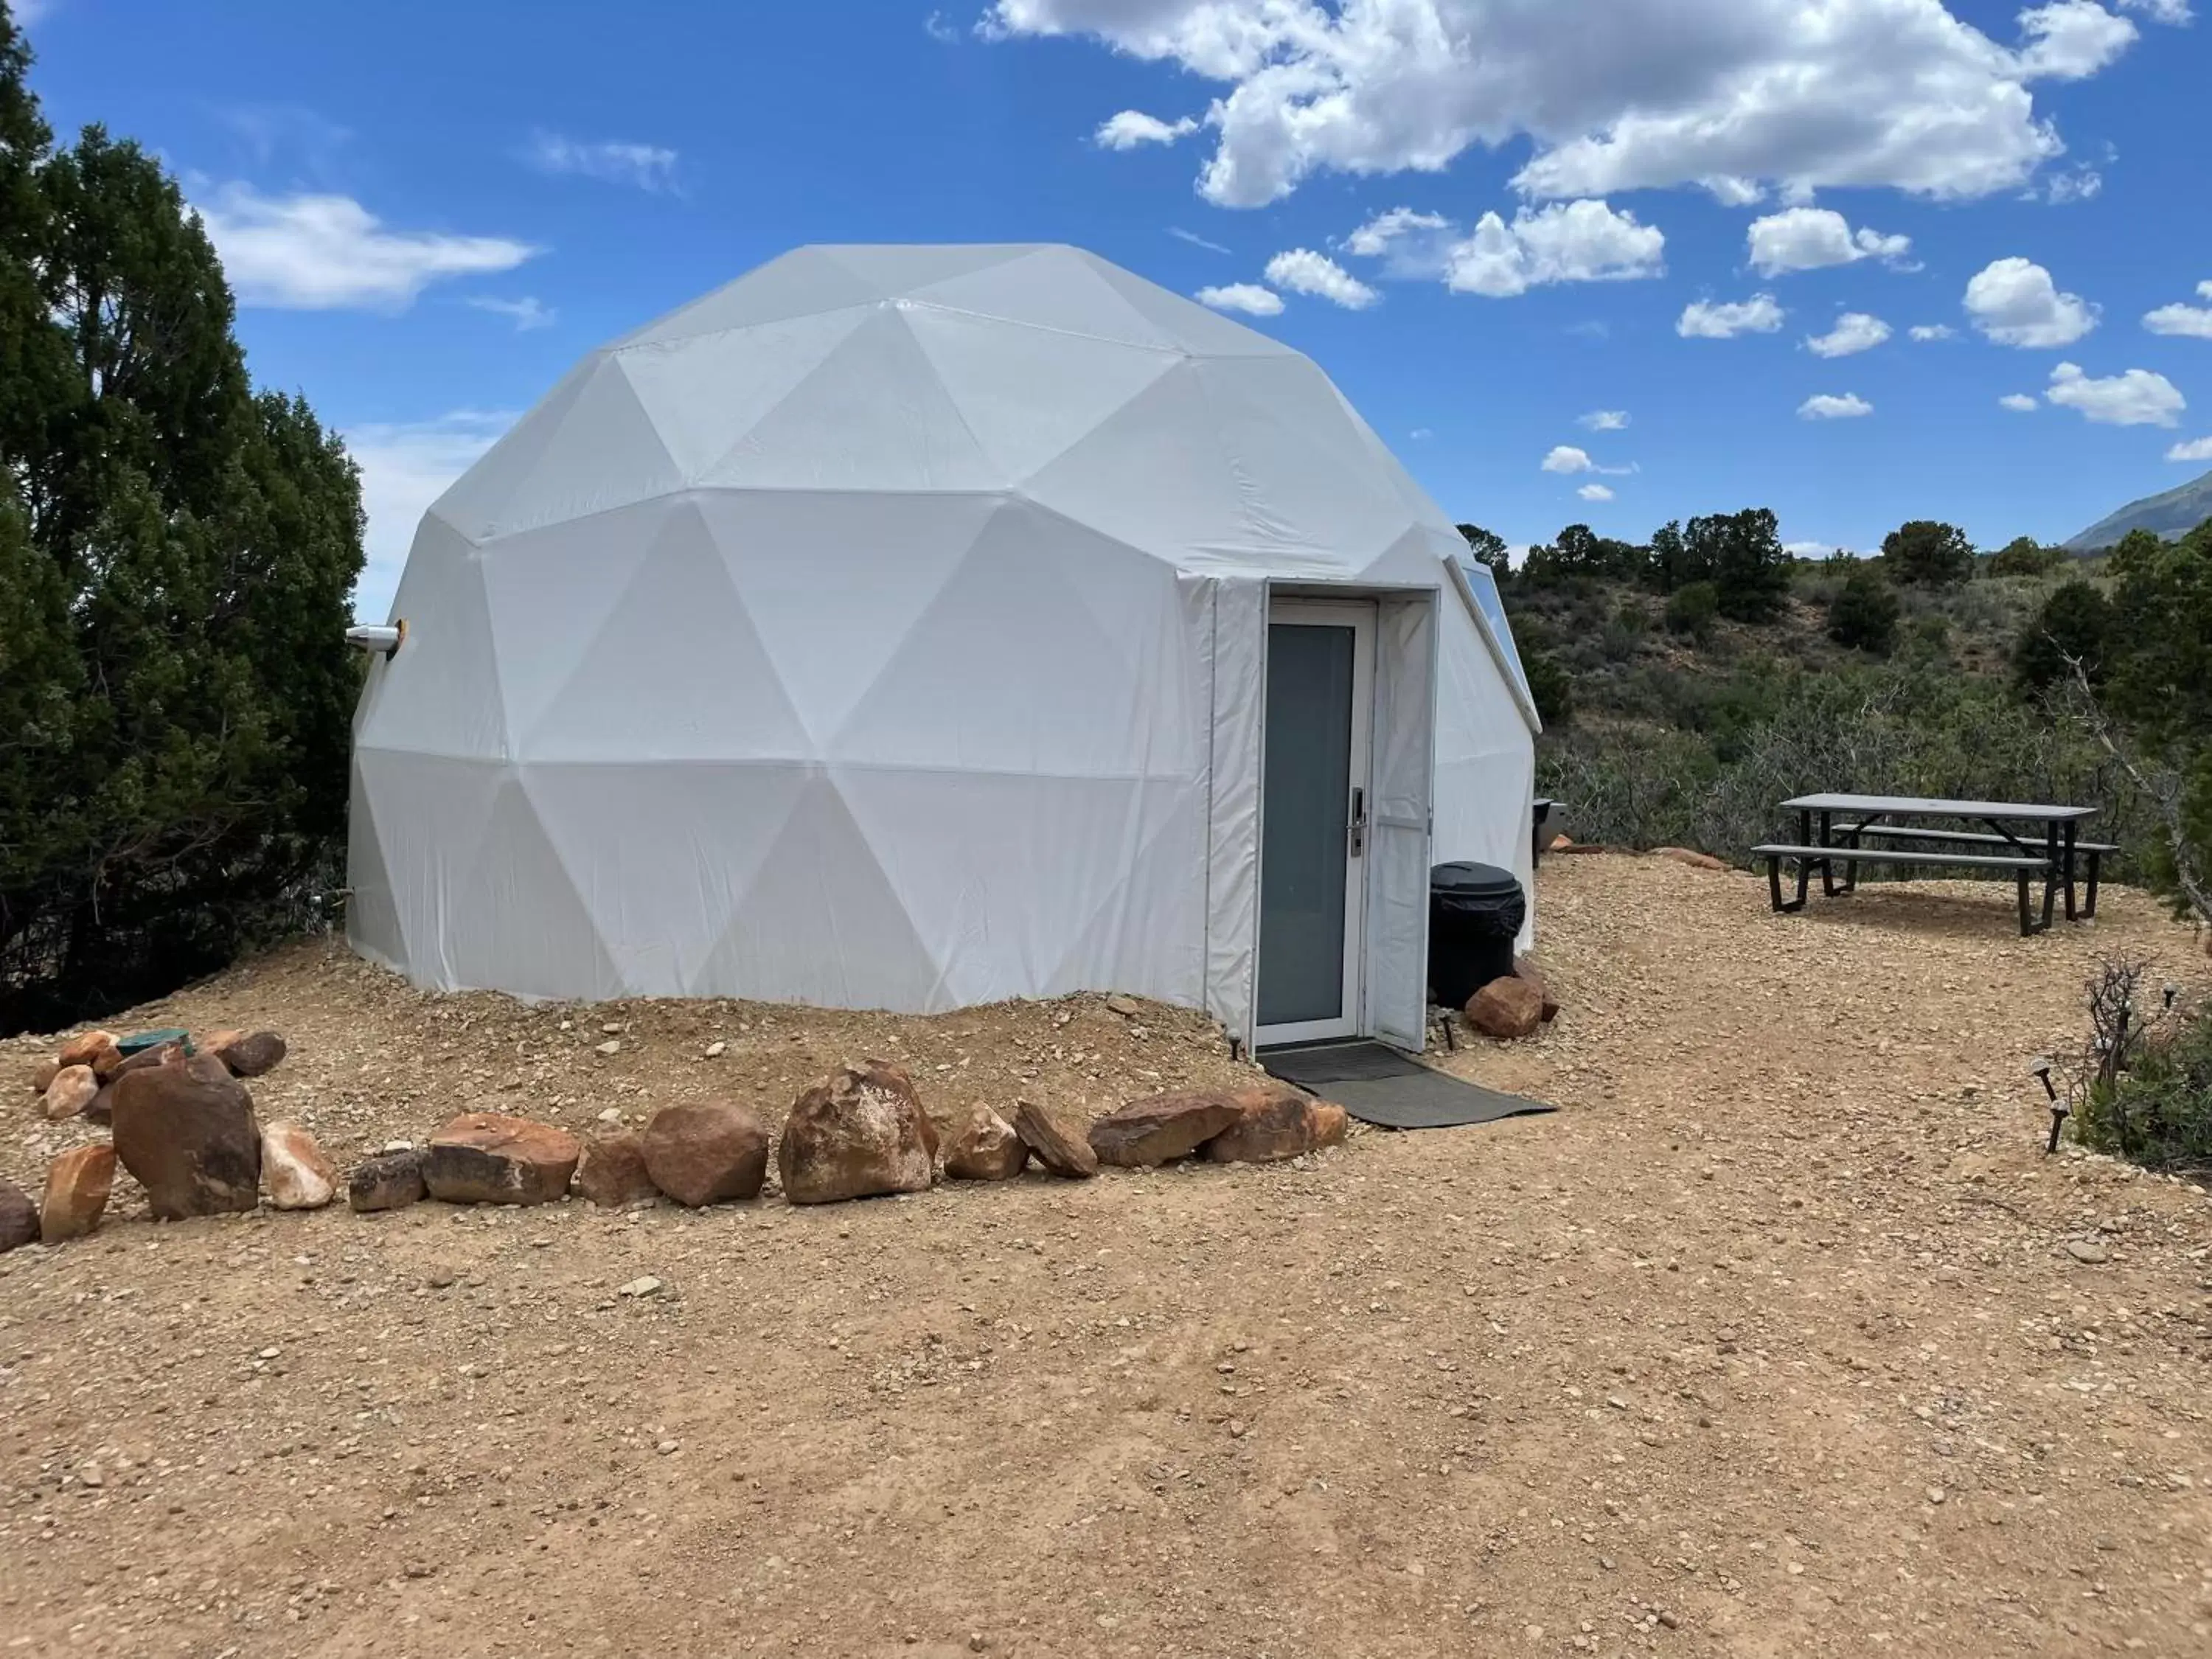 Property building in Canyon Rim Domes - A Luxury Glamping Experience!!